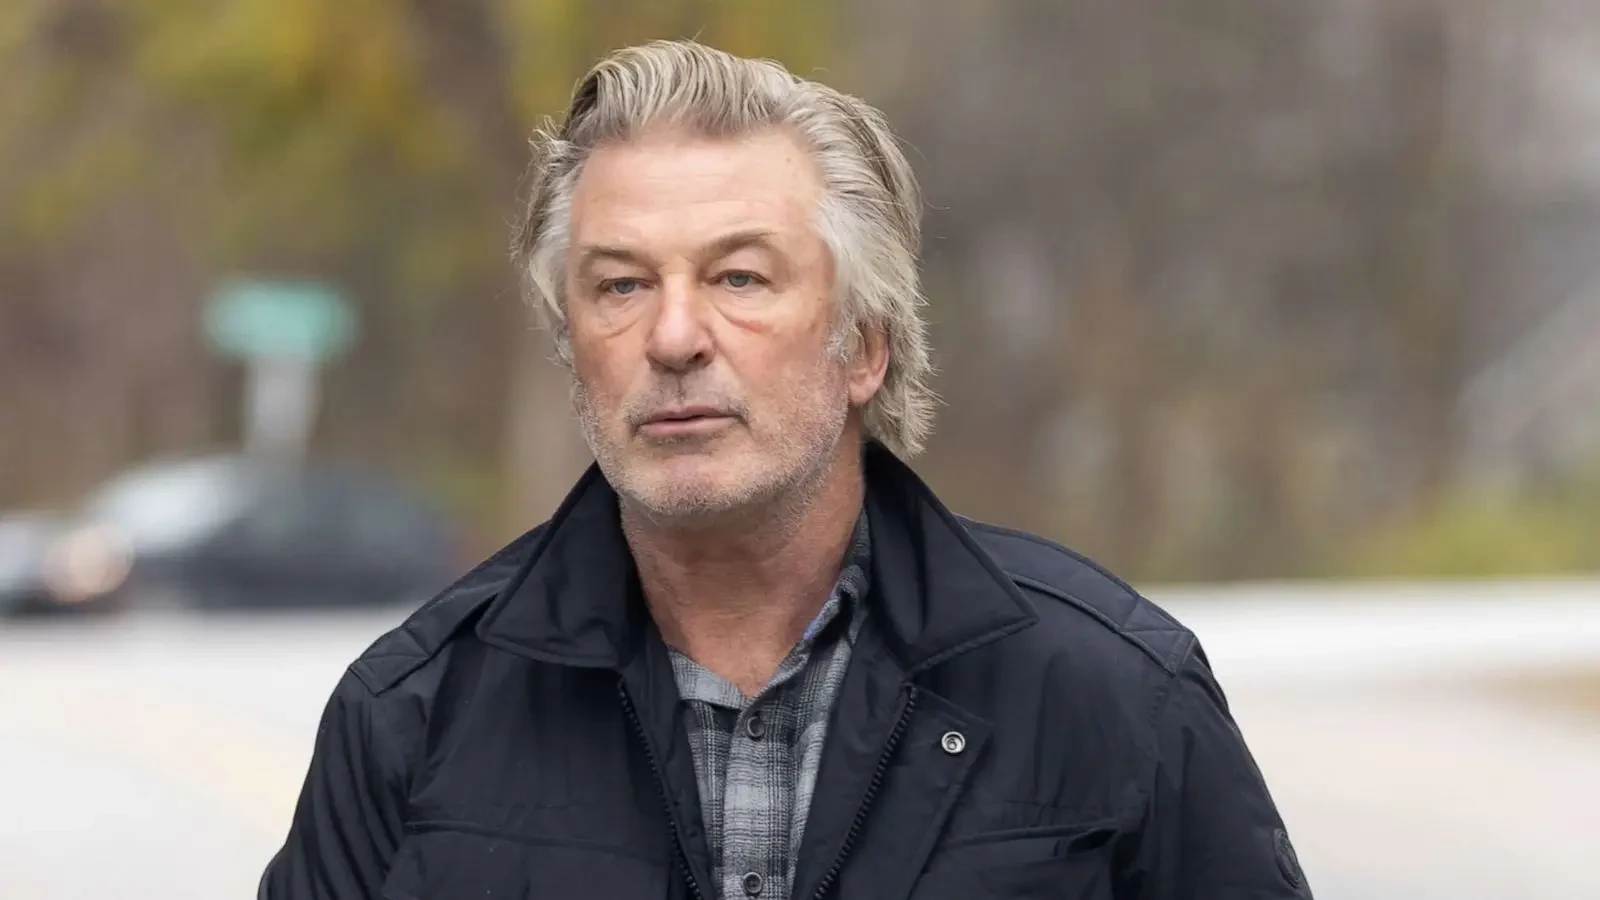 Alec Baldwin from the sets of Rust